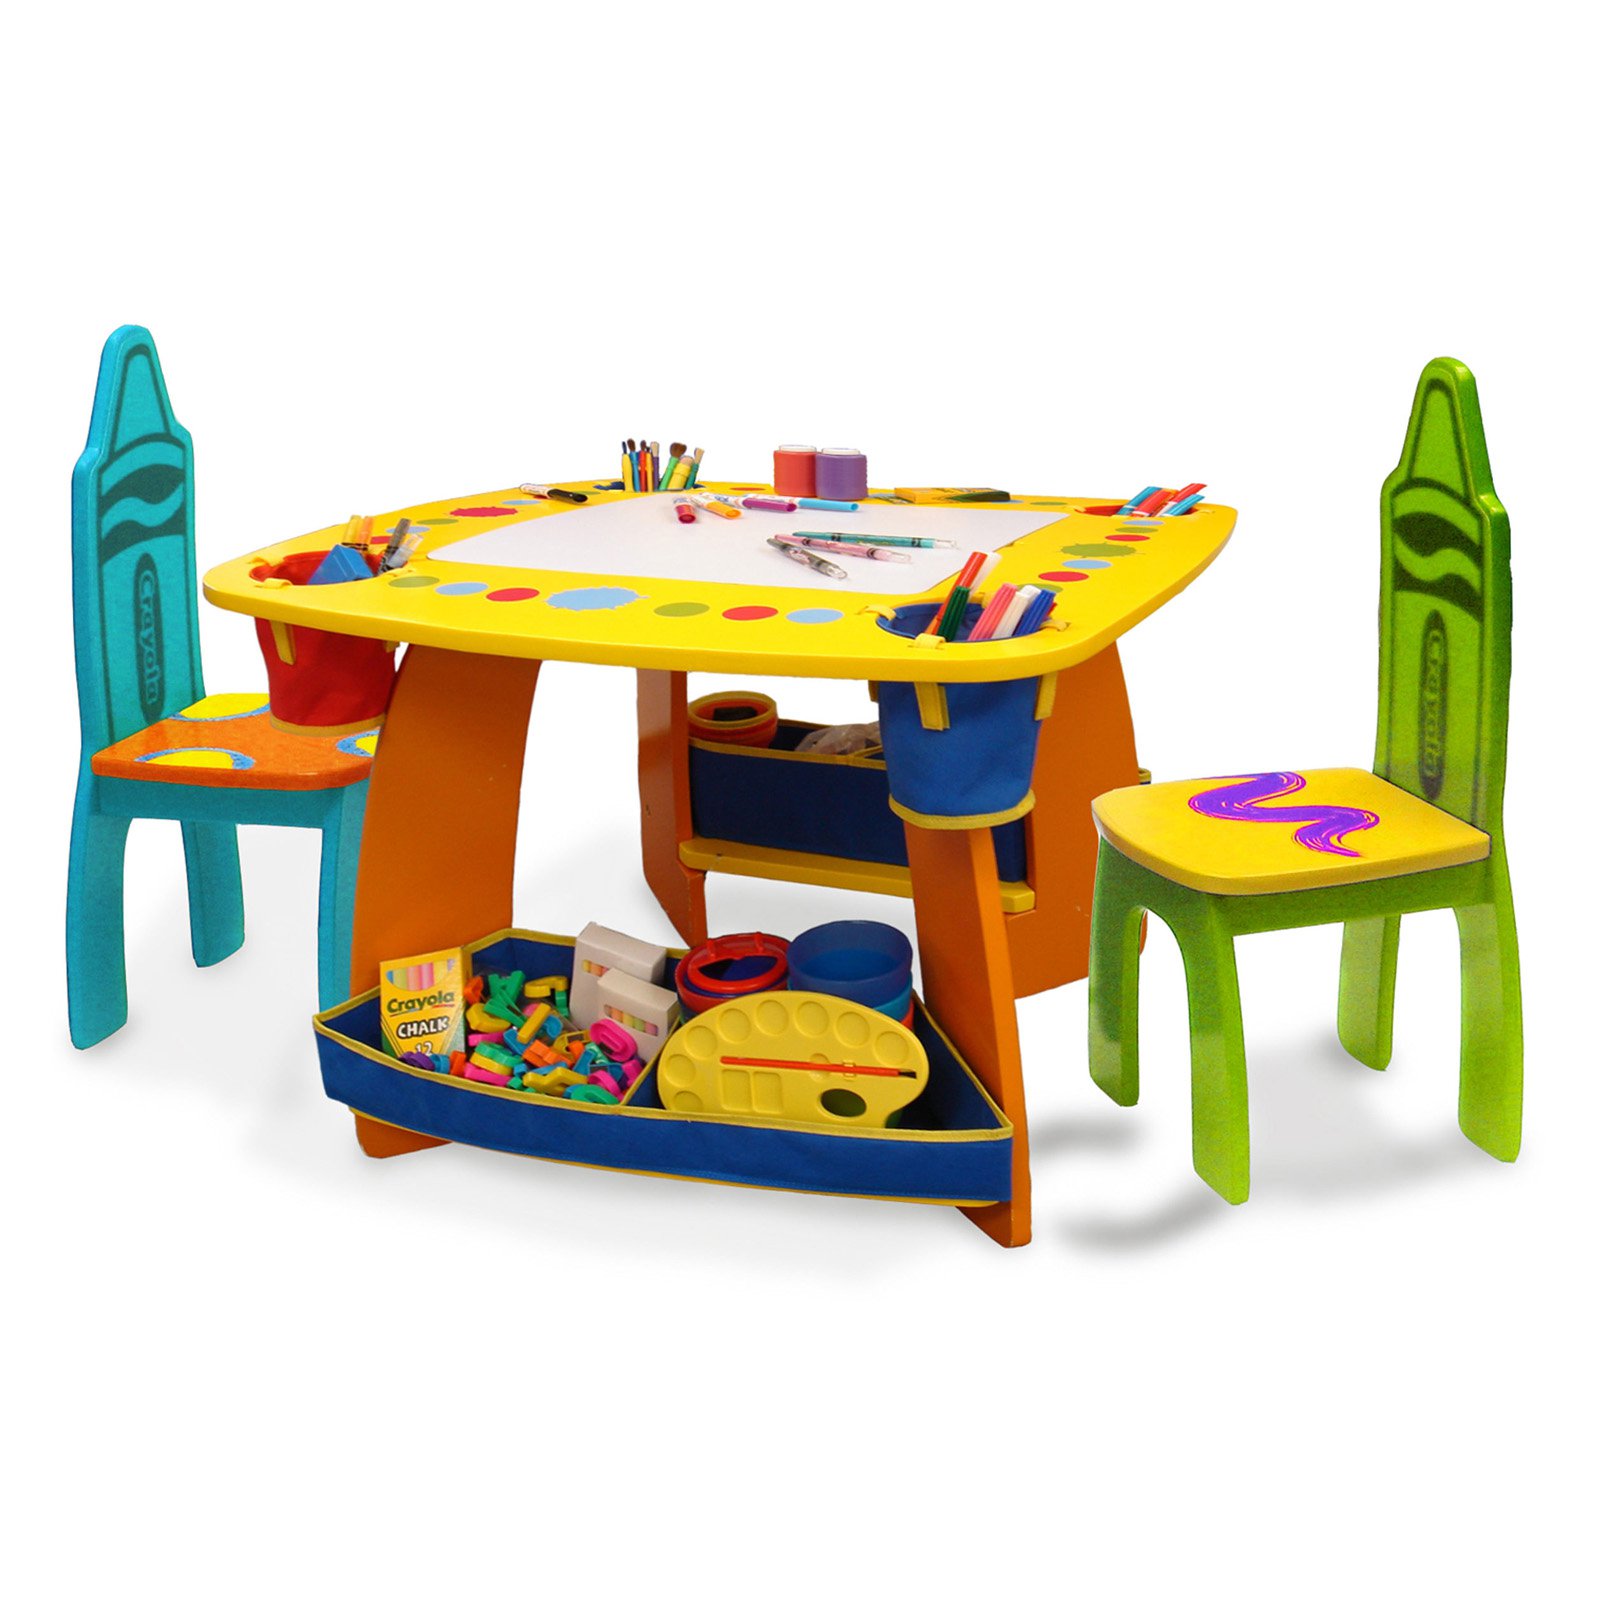 Kids table and chairs 3-piece childrenu0027s table and chairs, espresso - walmart.com CUKCYZP